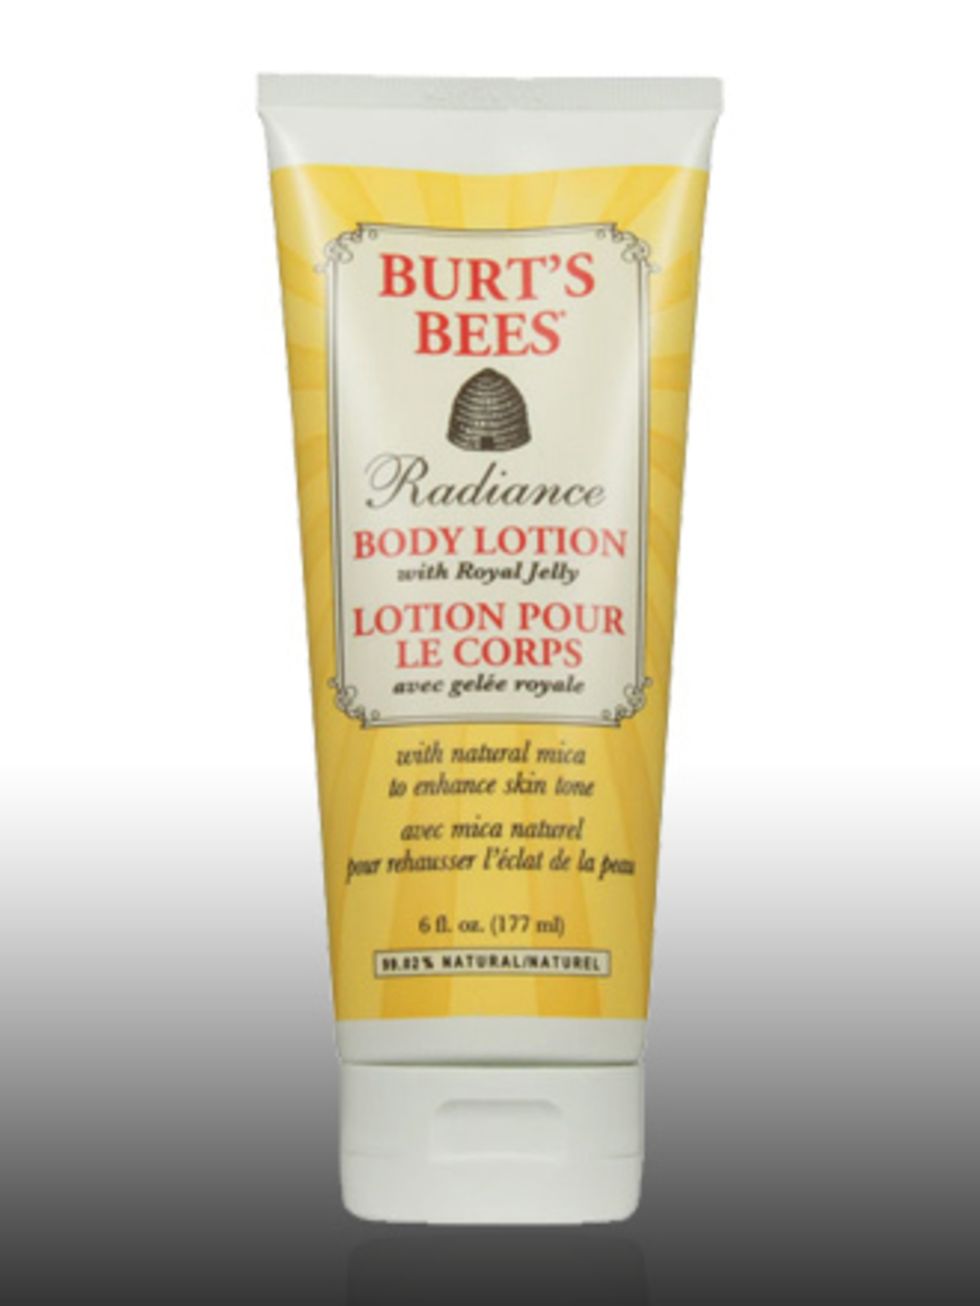 <p>Radiance Body Lotion, £10.95 by Burt's Bees at <a href="http://www.hqhair.com/code/products.asp?PageID=292&amp;SectionID=186&amp;FeaturedProduct=15020&amp;pID=1">HQhair</a> </p><p>Not only are Burts Bees products really effective and super kind to you